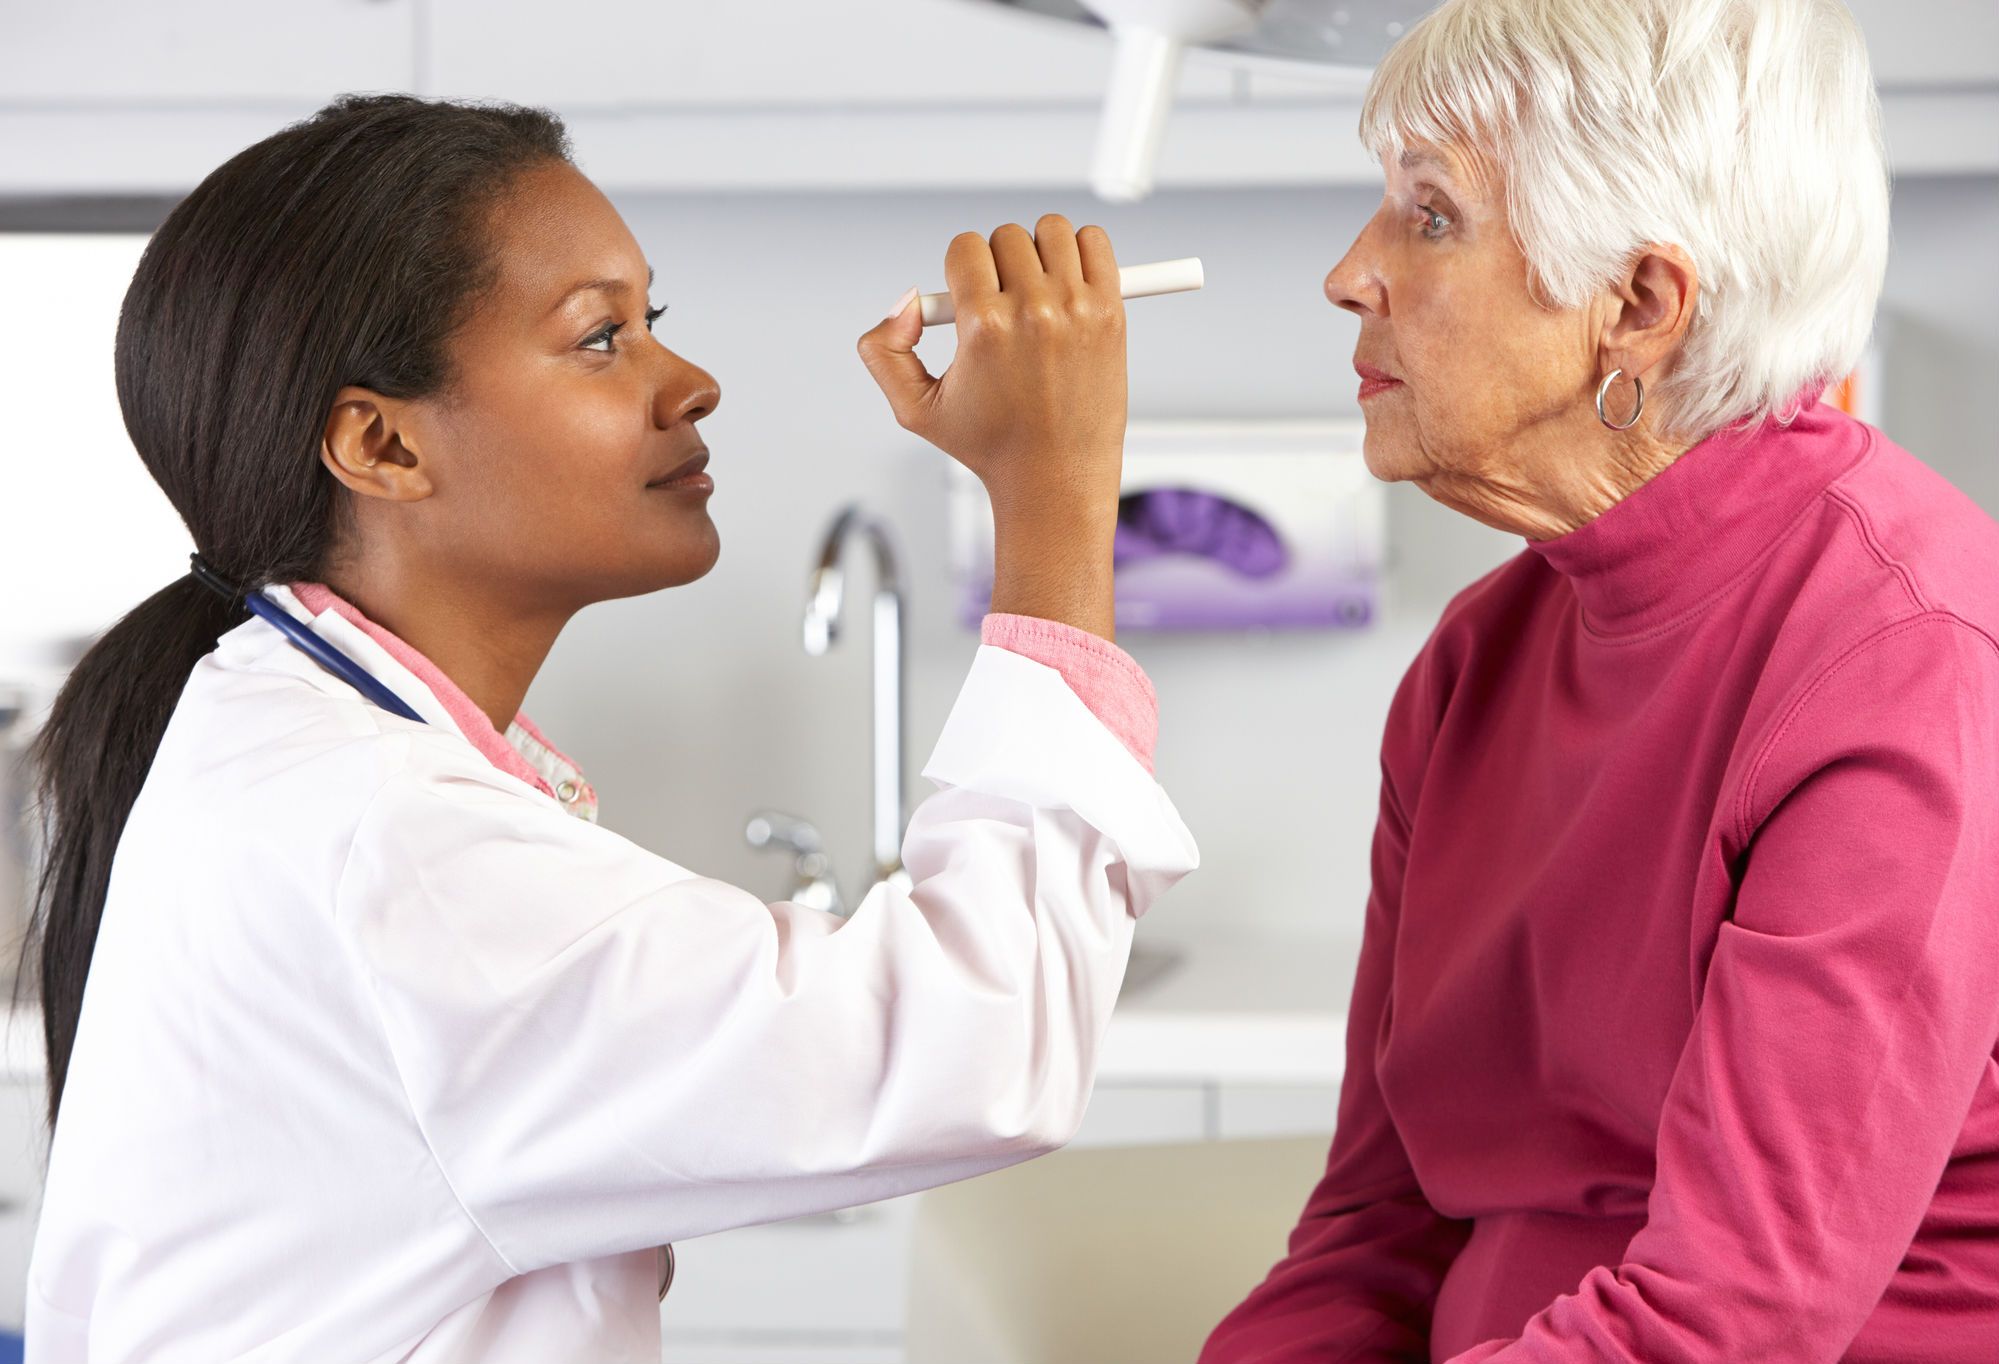 An eye doctor examines a woman's eyes.